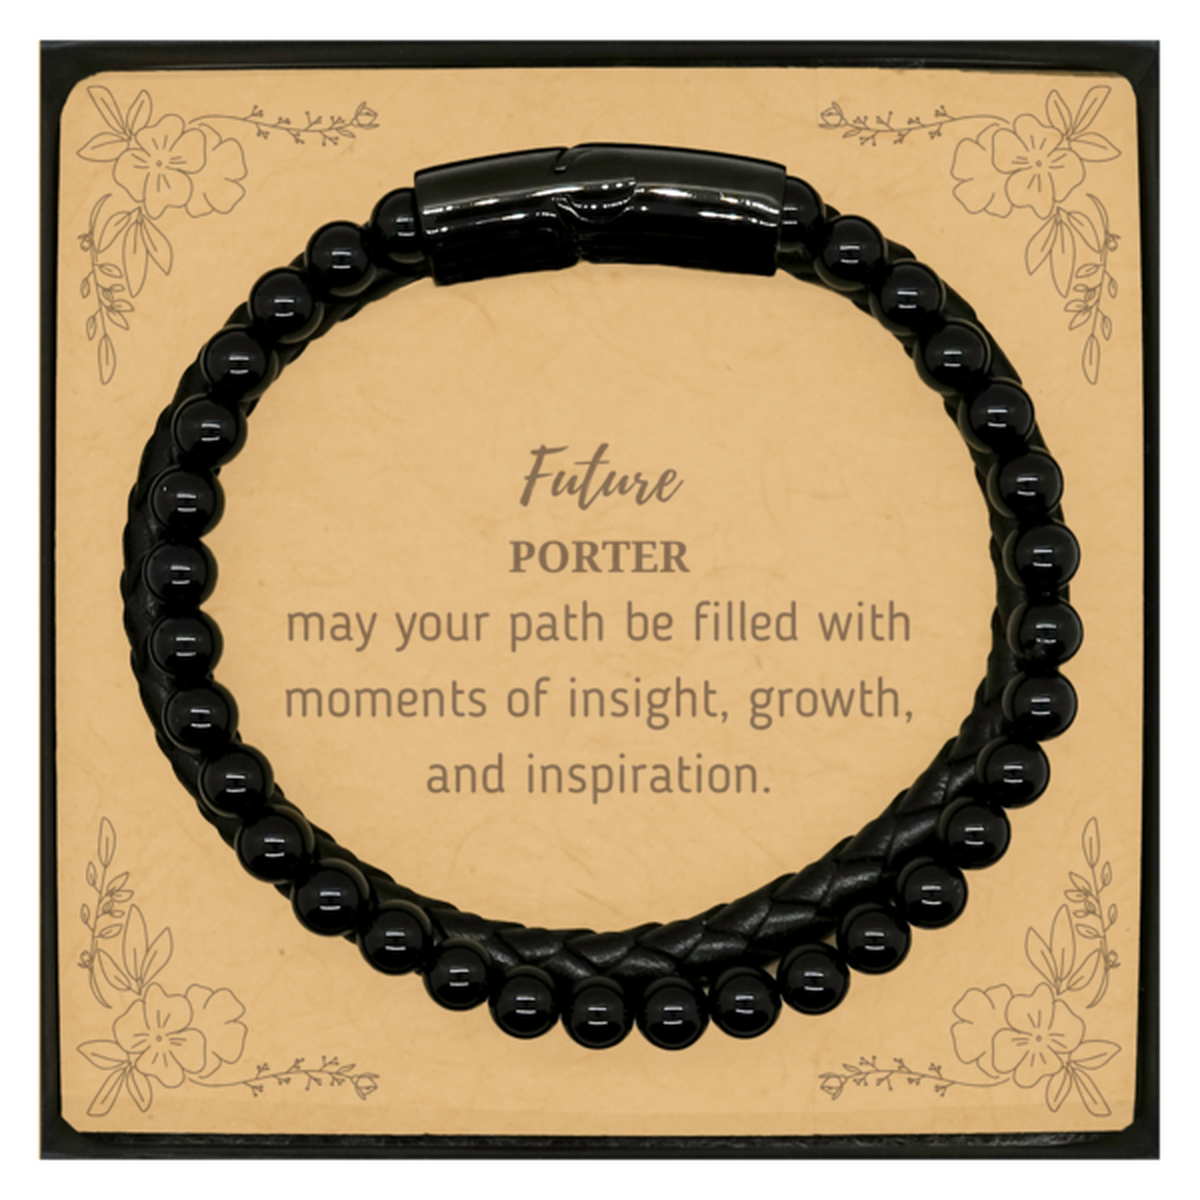 Future Porter Gifts, May your path be filled with moments of insight, Graduation Gifts for New Porter, Christmas Unique Stone Leather Bracelets For Men, Women, Friends